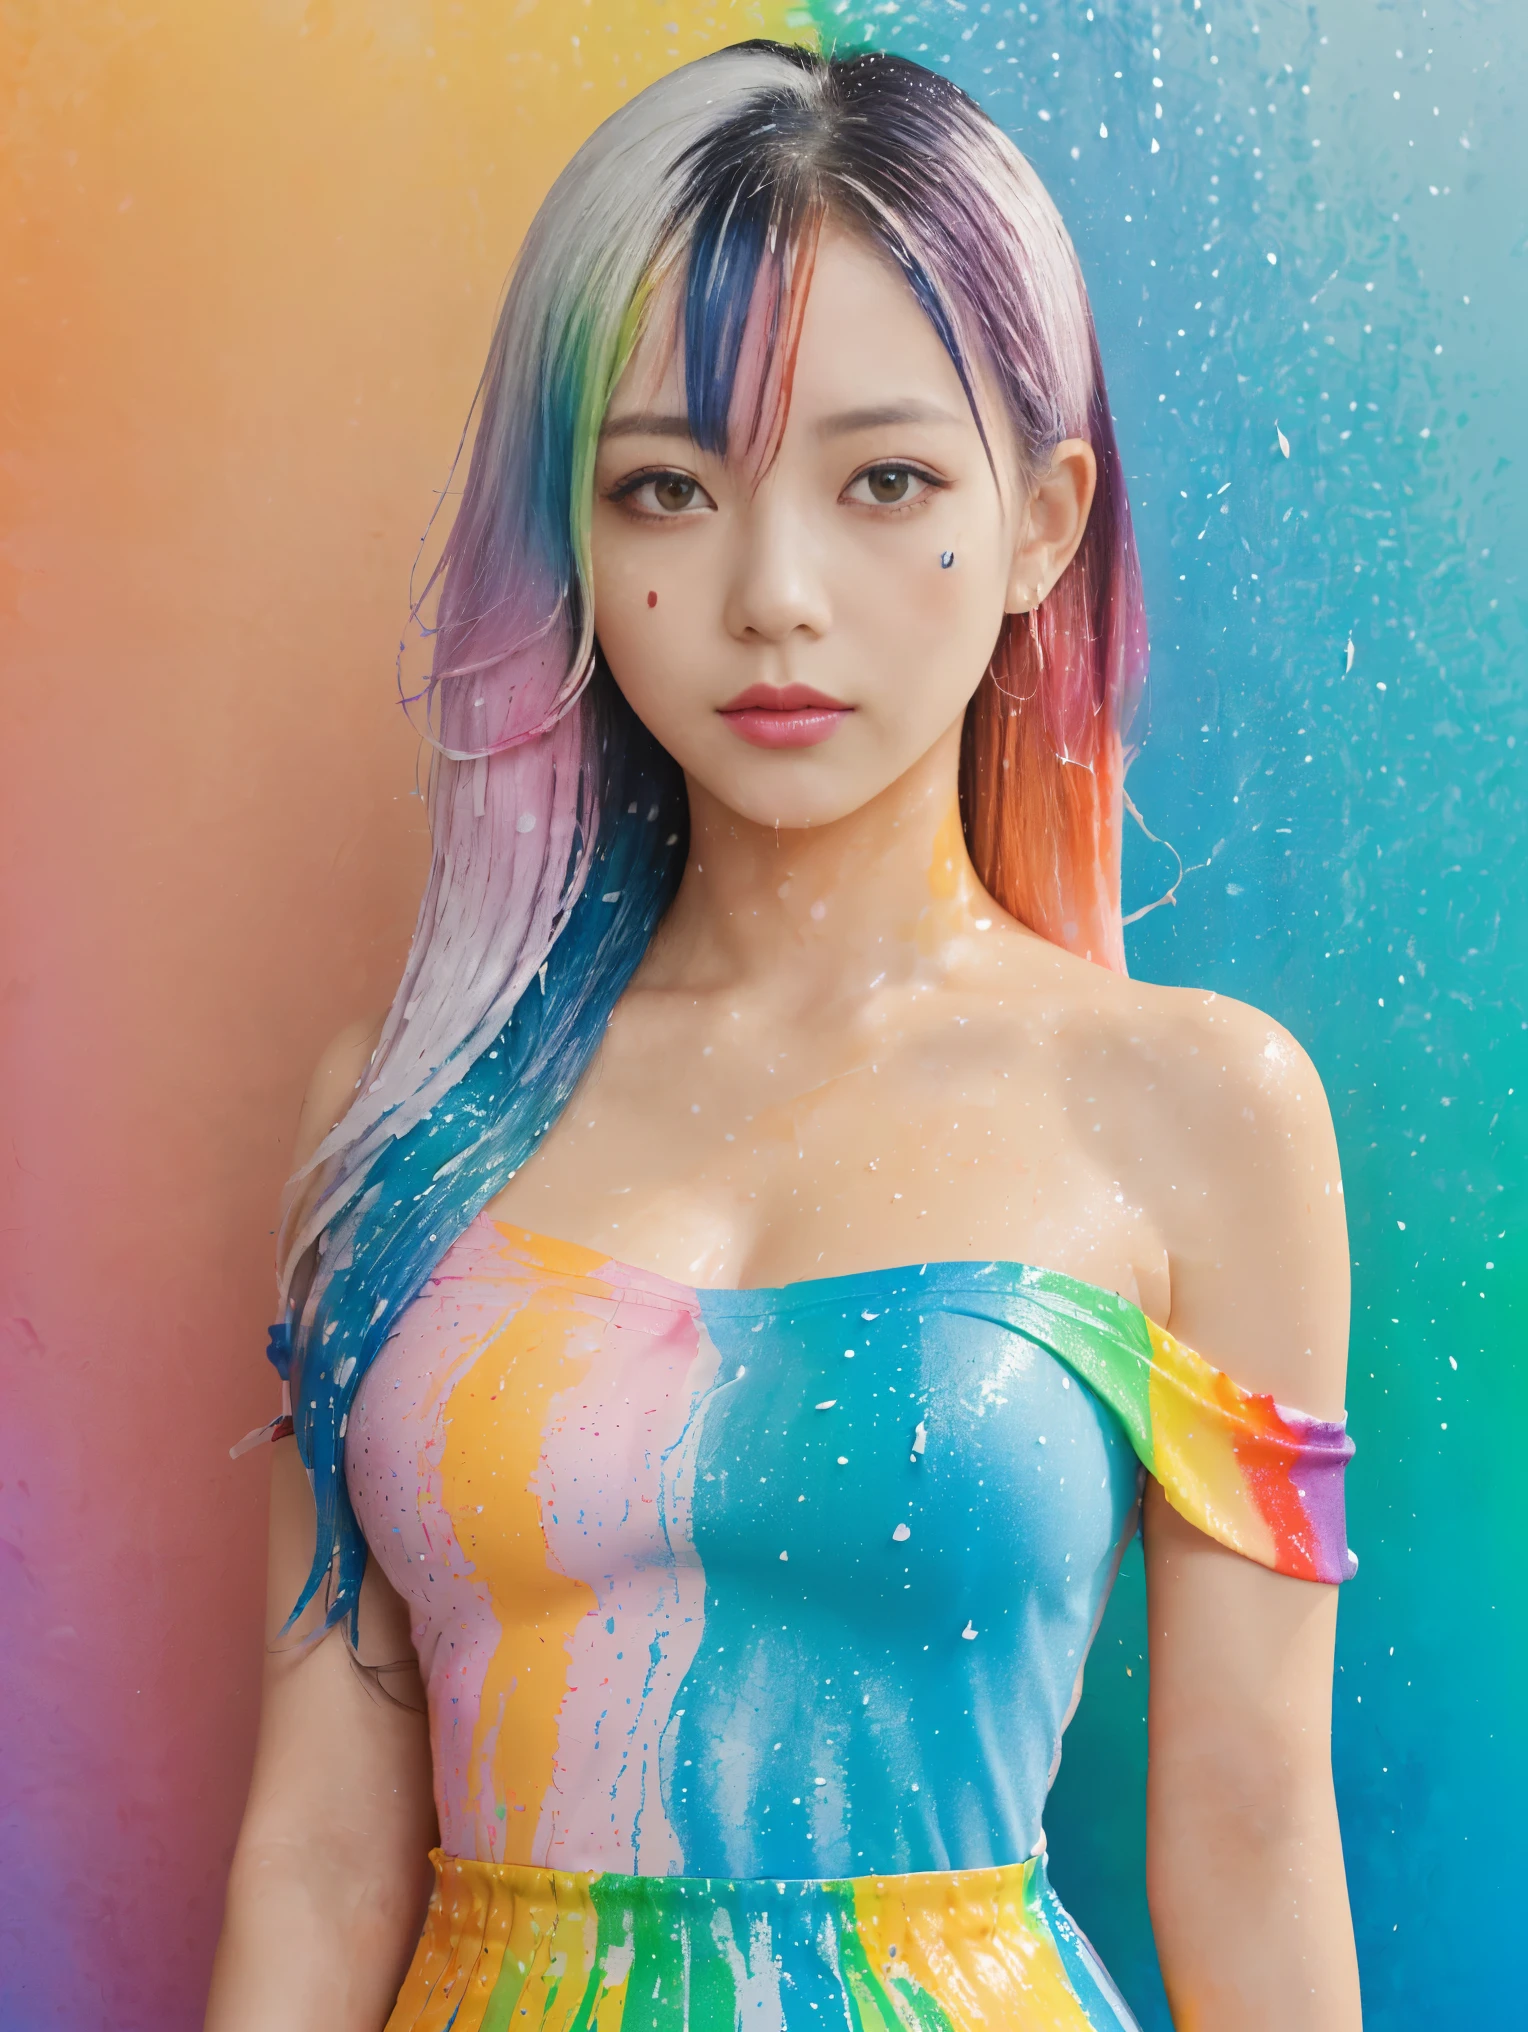 Pink Fashion T-Shirt：1.9），(colorfulな髪: 1.8), (All the colors of the rainbow: 1.8),(((((vertical painting：1.6))), （painting：1.6），front, comics, figures, paintings, Big eyes, Clear eyes,（ Rainbow gradient high ponytail：1.7）, Exquisite makeup, Mouth closed,(Small Fresh: 1.5),(Wipe the chest: 1.6) ，Long eyelashes, White off-the-shoulder T-shirt, White shoulder shirt，Looking at the audience, Big teary eyes, (Rainbow Hair：1.6), カラーsplash, （alone：1.8）, カラーsplash, An explosion of colors, thick paint style, Messy Lines, ((The Shining))，(colorful), (colorful), (colorful), colorful, Thick paint Style, (splash) (Color splash), Vertical painting, Upper Body, paint splash, Acrylic Pigments, Slope, paint, Best image quality, highest quality, masterpiece, alone, Depth of written boundary, Face paint, colorful clothes, (elegant: 1.2), nice,Long Hair, Wind, (elegant: 1.3), (petal: 1.4)，(((masterpiece))),(((highest quality))),((Super detailed)),(figure),(Dynamic Angle),((floating)),(paint),((Disheveled Hair)),(alone),(One girl) , (((Detailed anima face))),((Beautifully detailed face)),collar,Exposing shoulders,Gray Hair, ((colorful hair)),((Striped Hair)),Beautiful fine details,(Slope color eyes),(((colorful eyes))),(((colorful background))),(((High chroma))),(((surrounded by colorful splashes))),